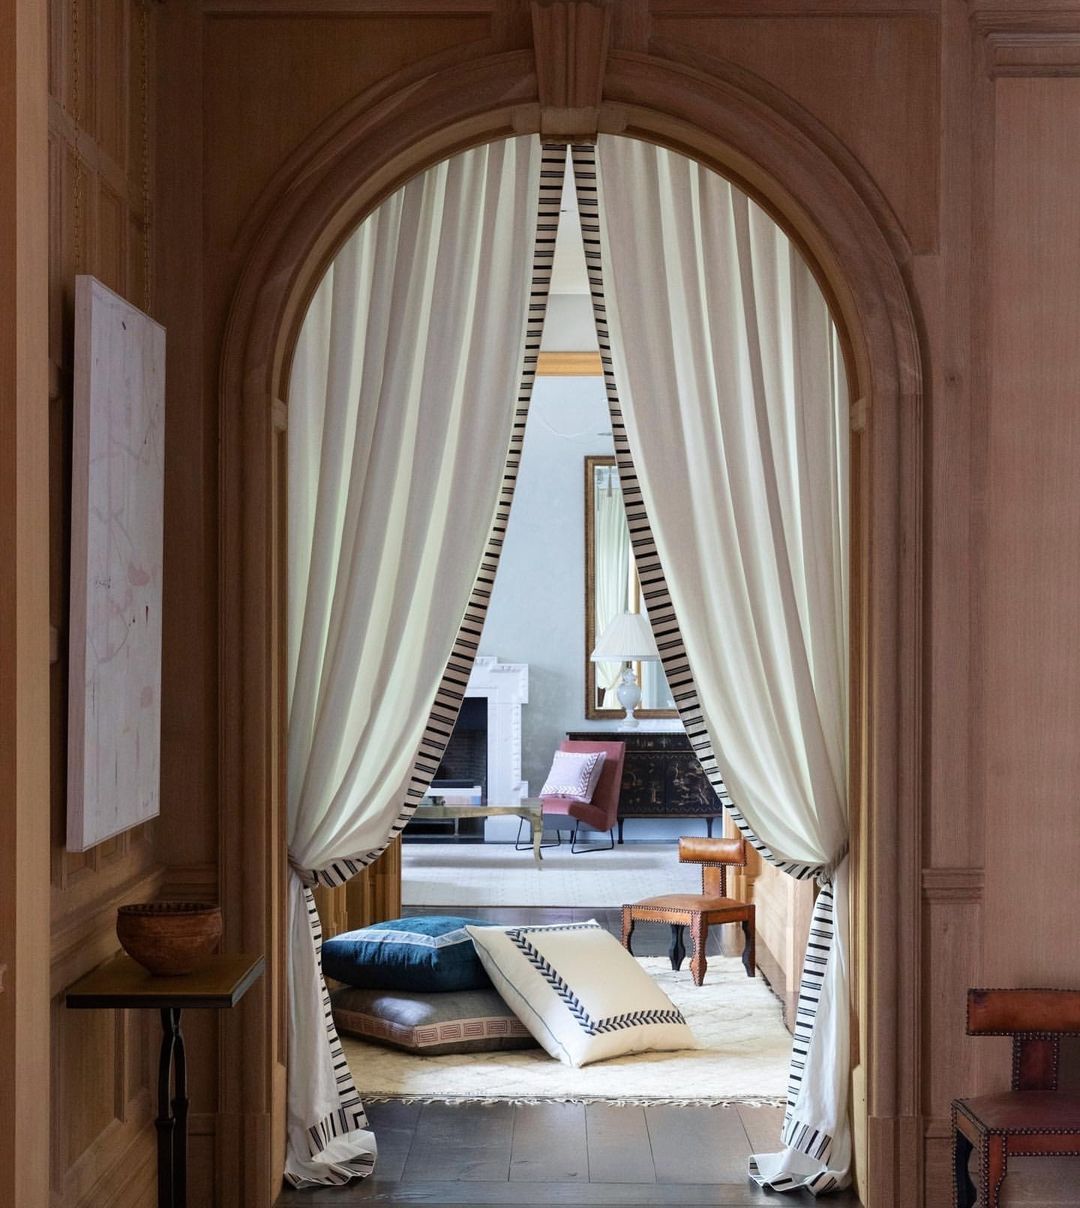 Creating Privacy and Style with Doorway
Curtains